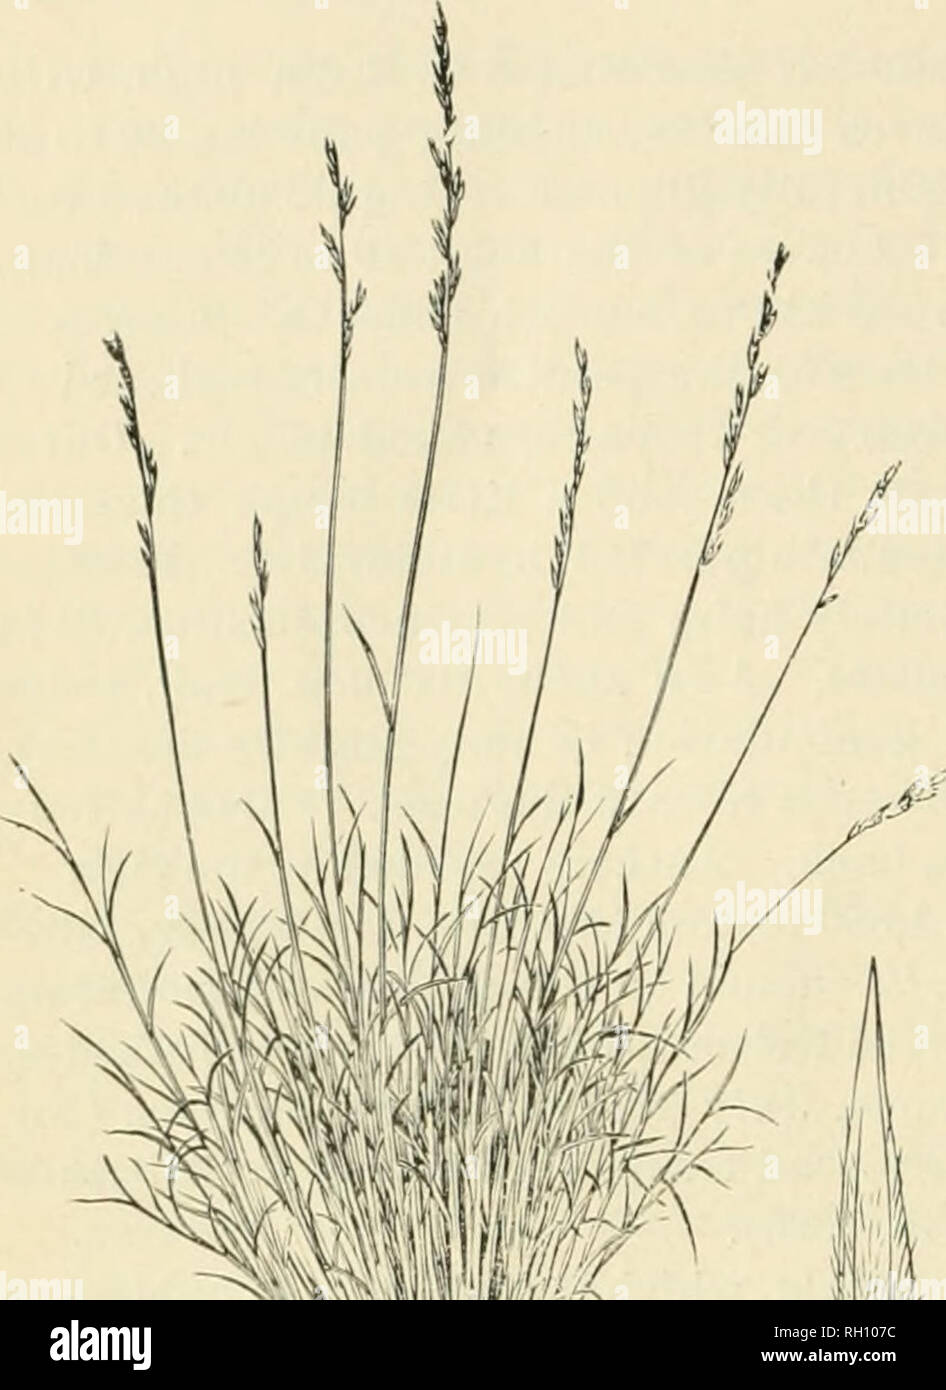 . Bulletin. Gramineae -- United States; Forage plants -- United States. 48 SPOROBOLUS PALMERI Scribn., sp.ii. (PI. V.) A deusely ca'spitose. ,i;laucous perennial, 3 to 5 dm. bigli, with narrow, spreading leaves and diffuse panicles 20 to 30 cm. long. Sheaths smooth, striate, crowded below, bearded at the throat. Ligule a short, dense fringe of hairs. Leaf-blades 5 to 10 or 12 cm. long, 2 to 4 mm. wide, rather rigid, very sharp-pointed, strongly involute when dry and more or less ilexuous, smooth and glaucous, especially on the upper surface the wliolc plant more or less glaucous. Panicle-branc Stock Photo